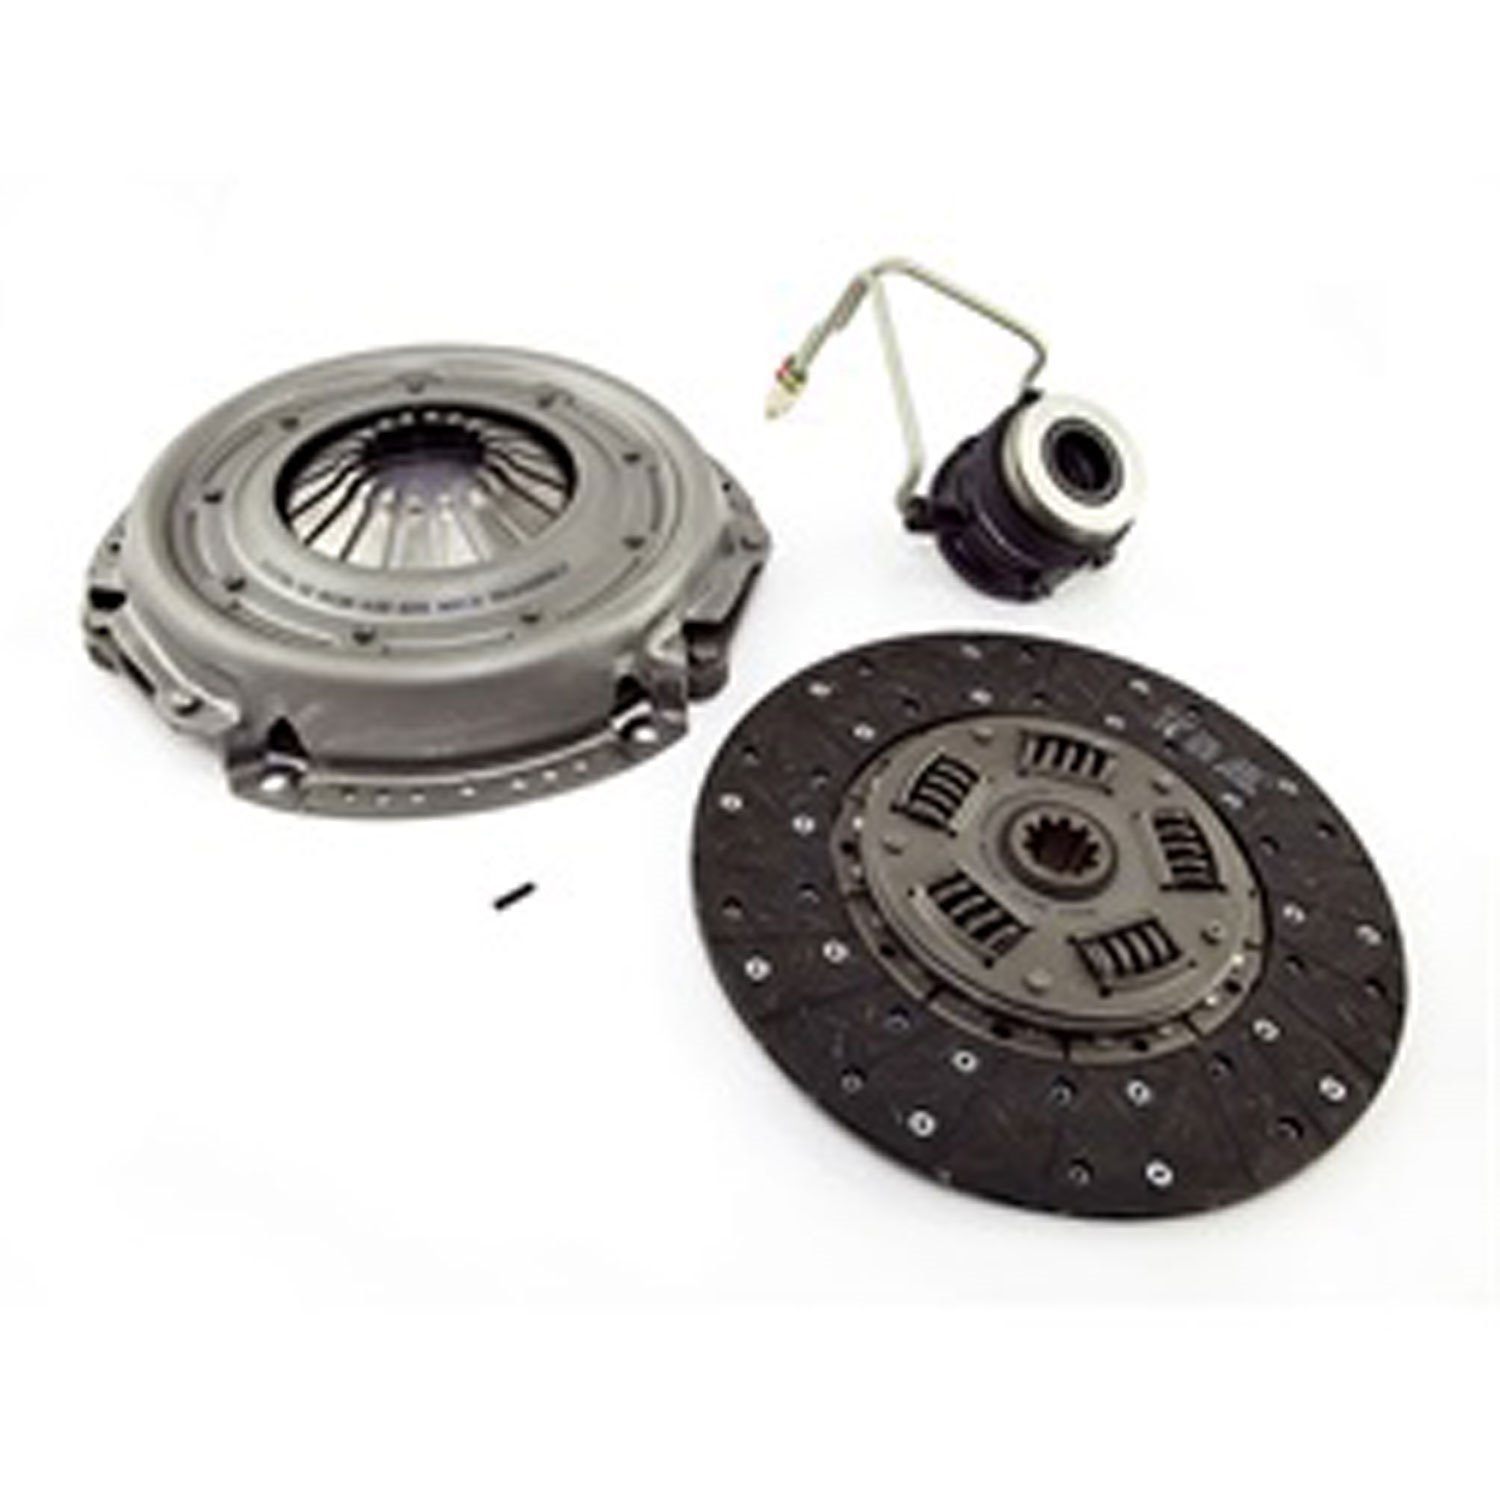 Regular clutch kit for 87-89 Cherokee Comanche and Wranglers 6-cyl and BA-10 transmission. Includes